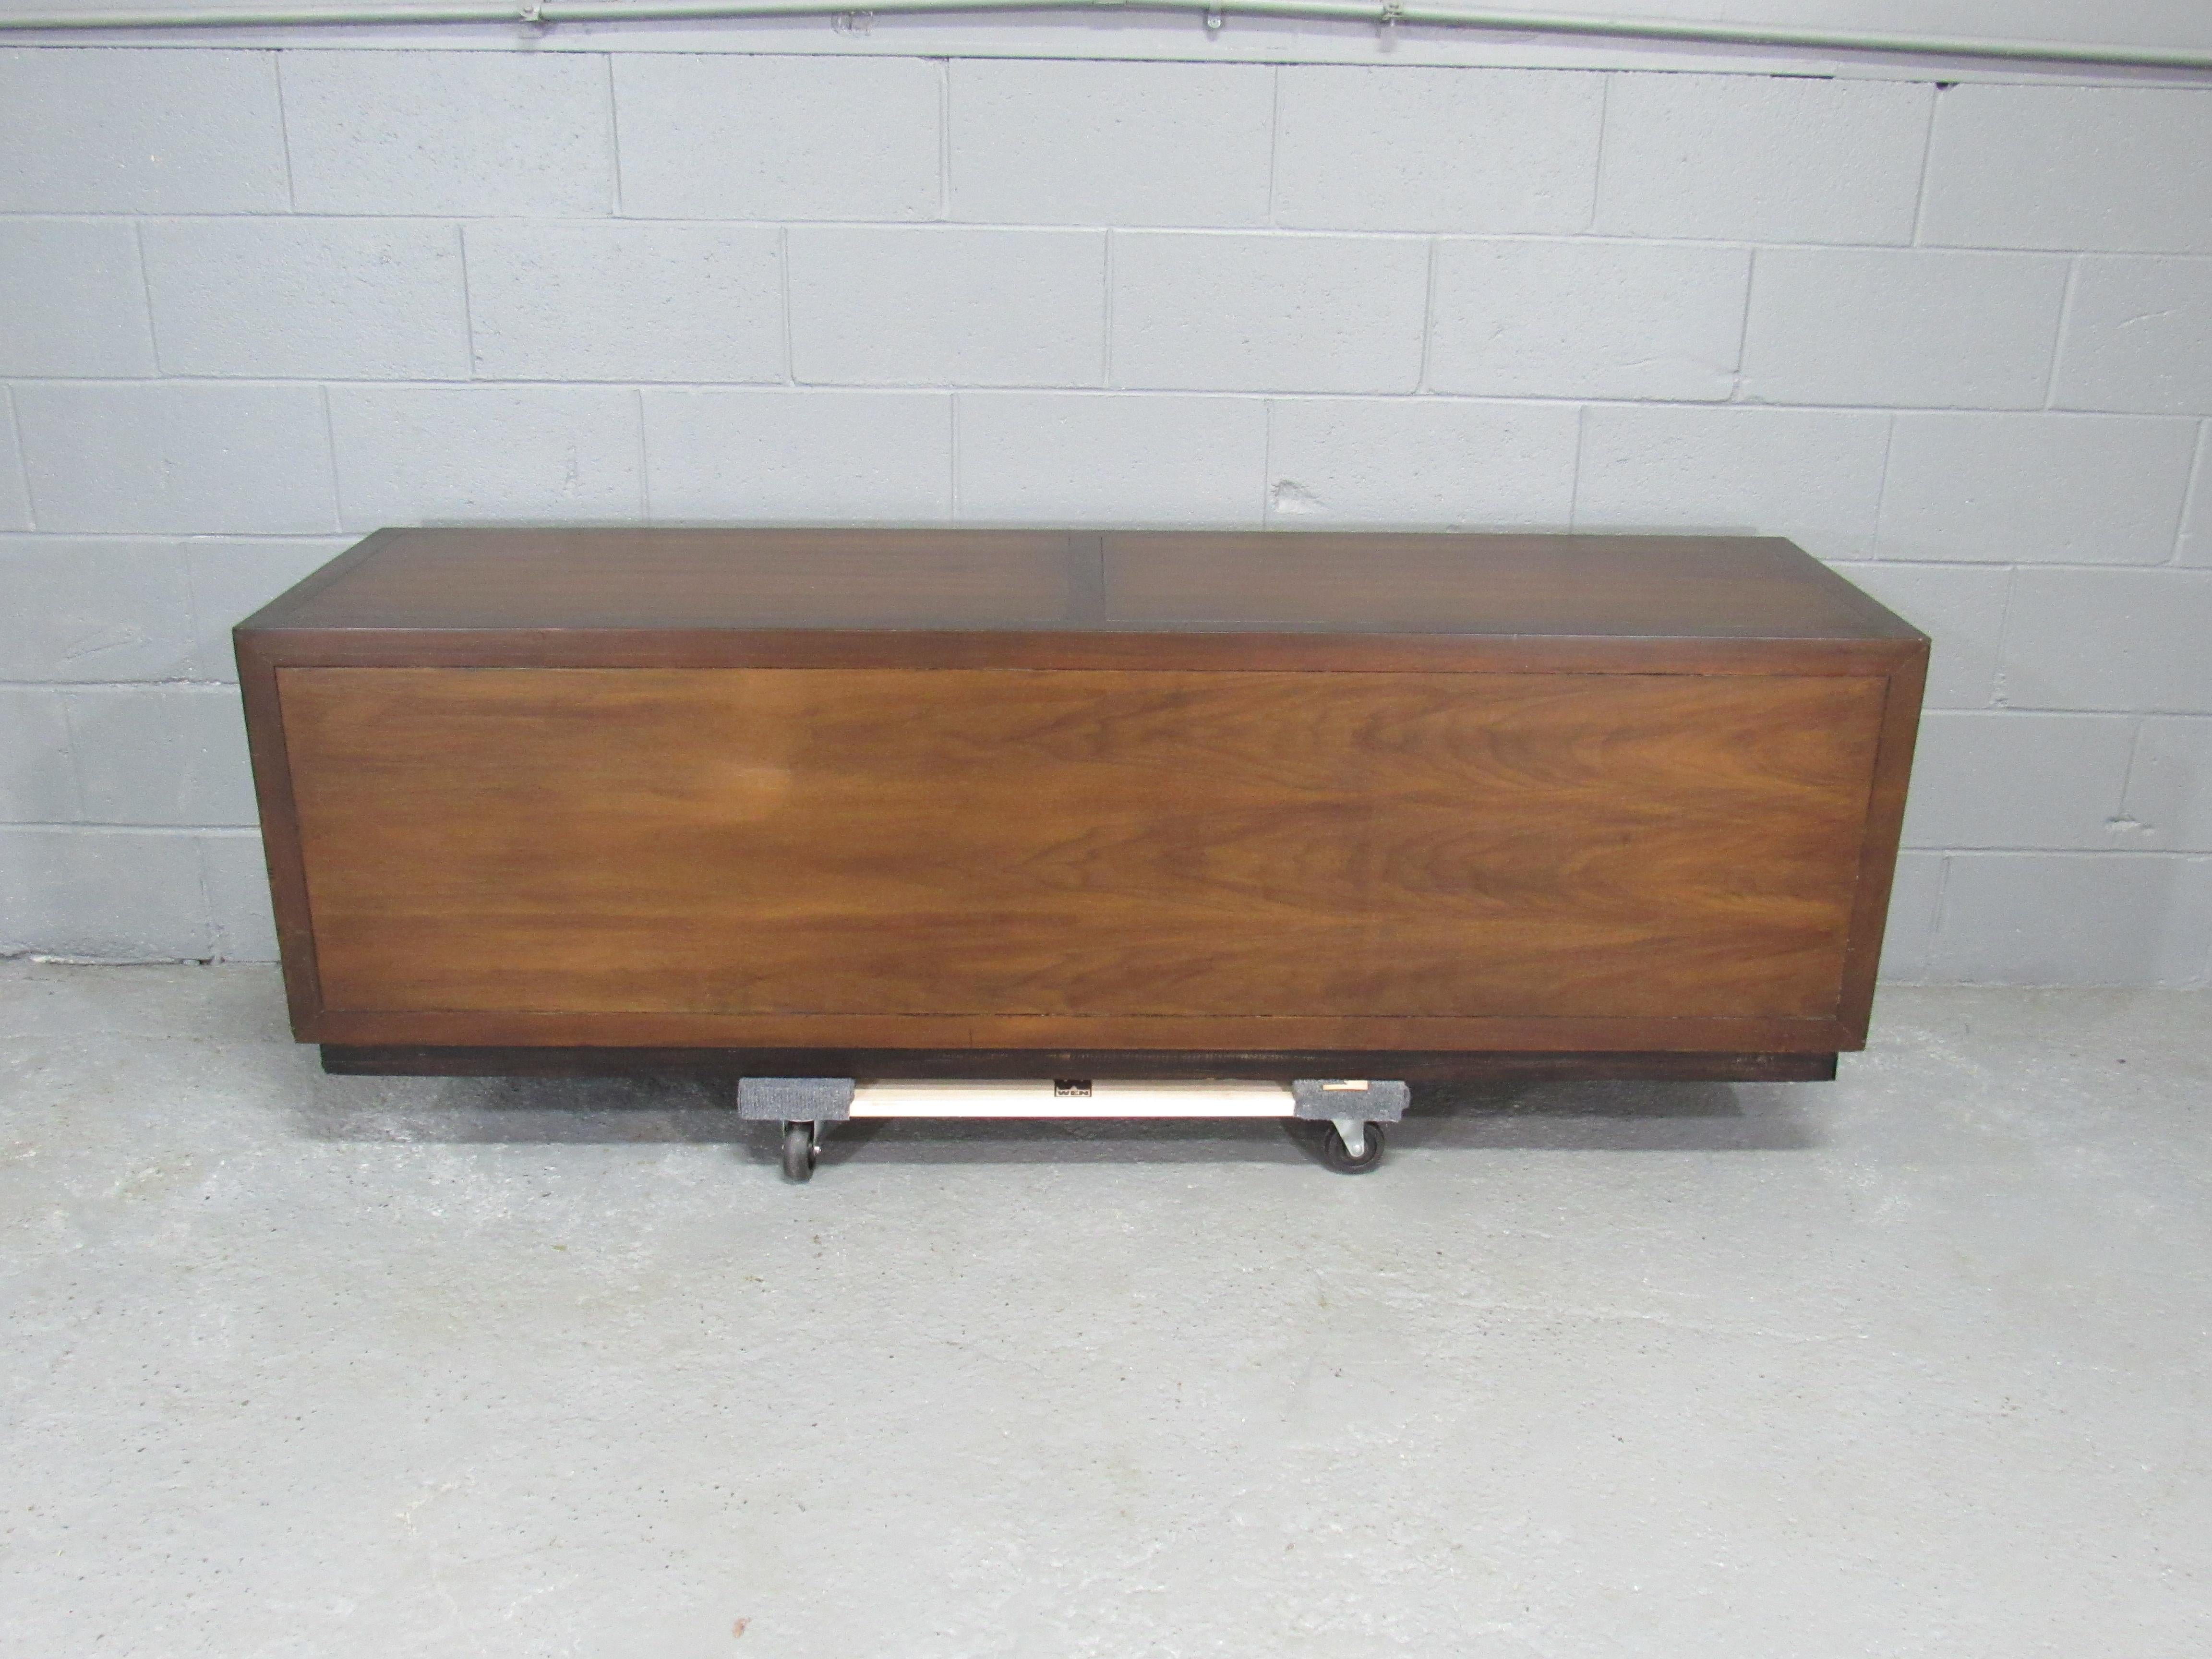 Chrome Mid-Century Modern Sideboard Credenza by Drexel